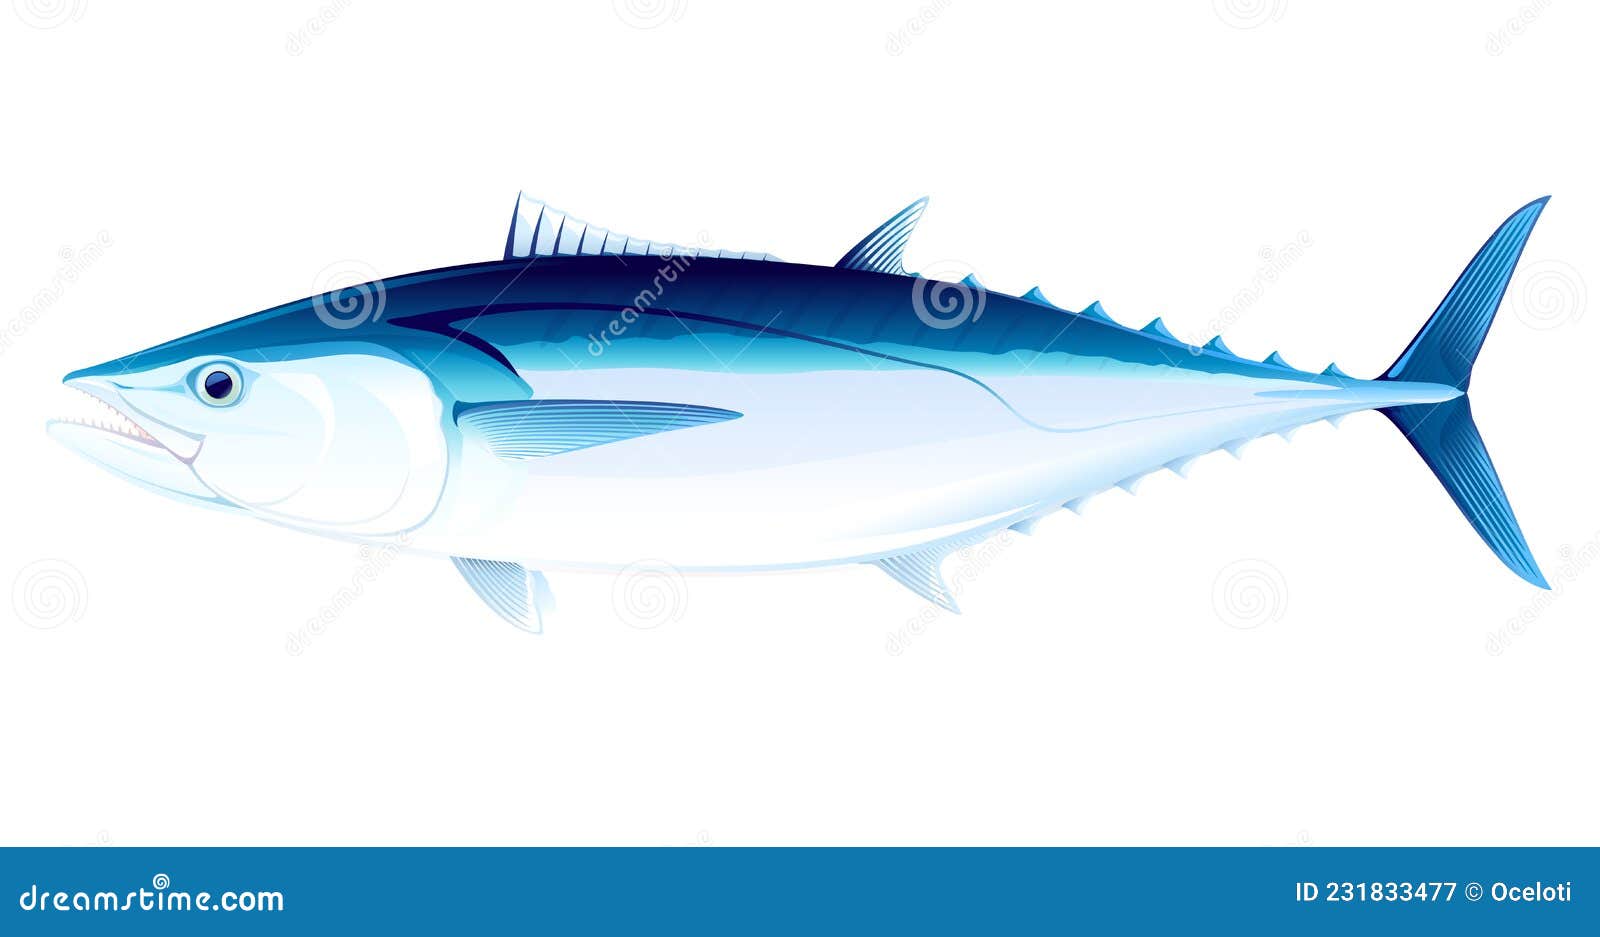 Dogtooth Tuna Fish in Side View Illustration Stock Vector ...